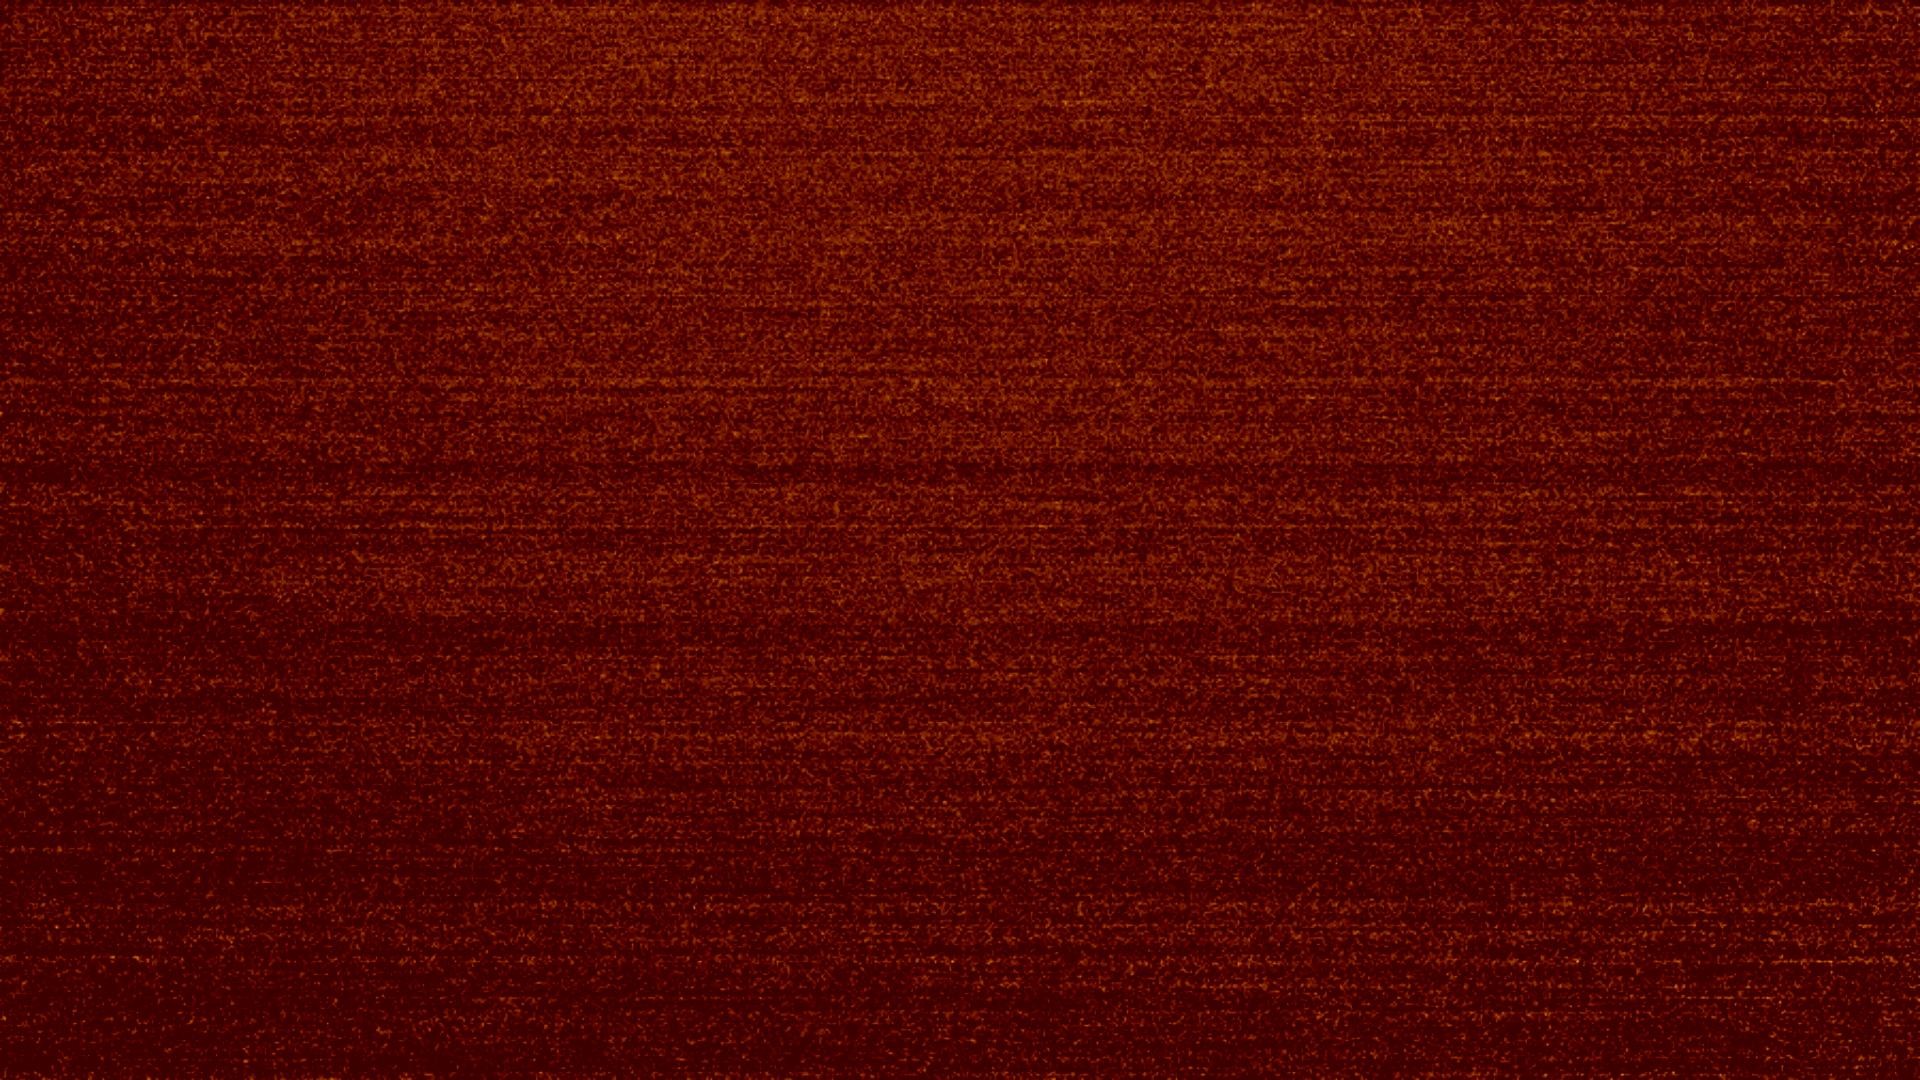 red and gold wallpaper,red,brown,maroon,wood,pattern